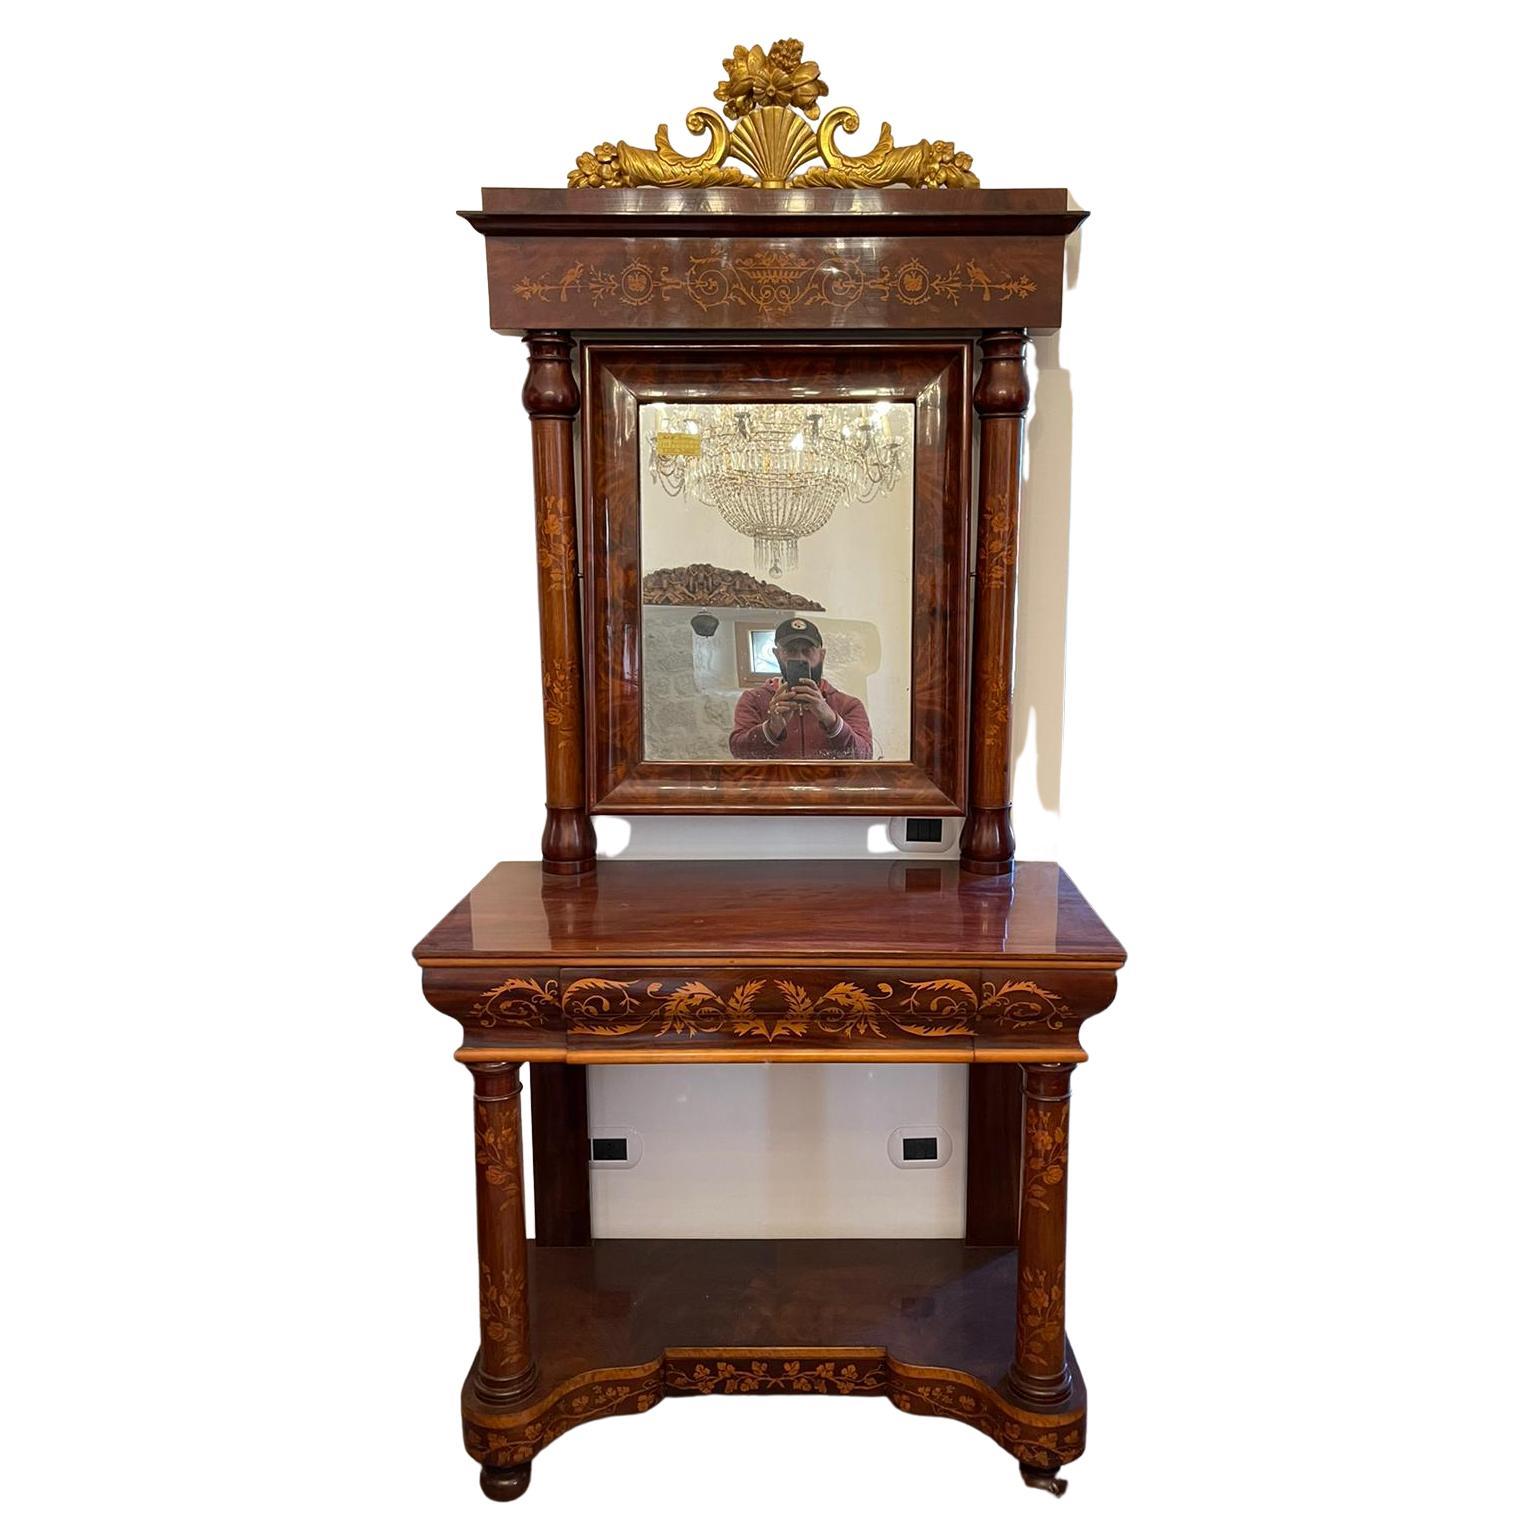 Spanish console table with mirror, Charles X era (1815-1830), mahogany wood and boxwood and maple inlays. Fully inlaid columns support a tilting mirror, surmounted by a cymatium formed by two cornucopias supporting a shell with a floral composition